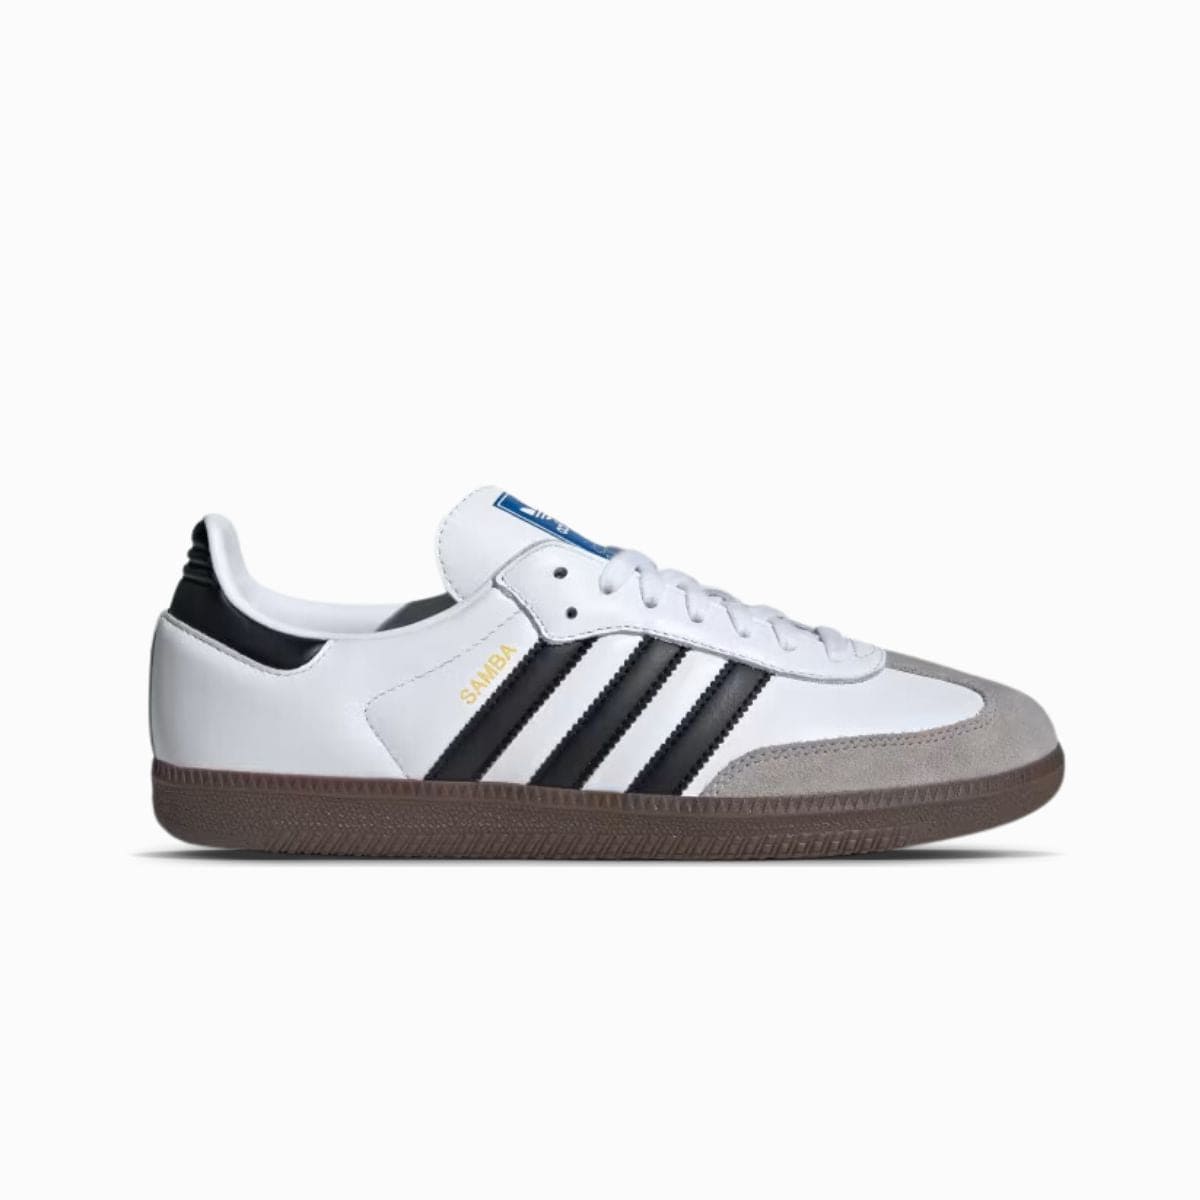 Replacement Adidas Shoe Laces for Adidas Samba OG Sneakers by Kicks Shoelaces